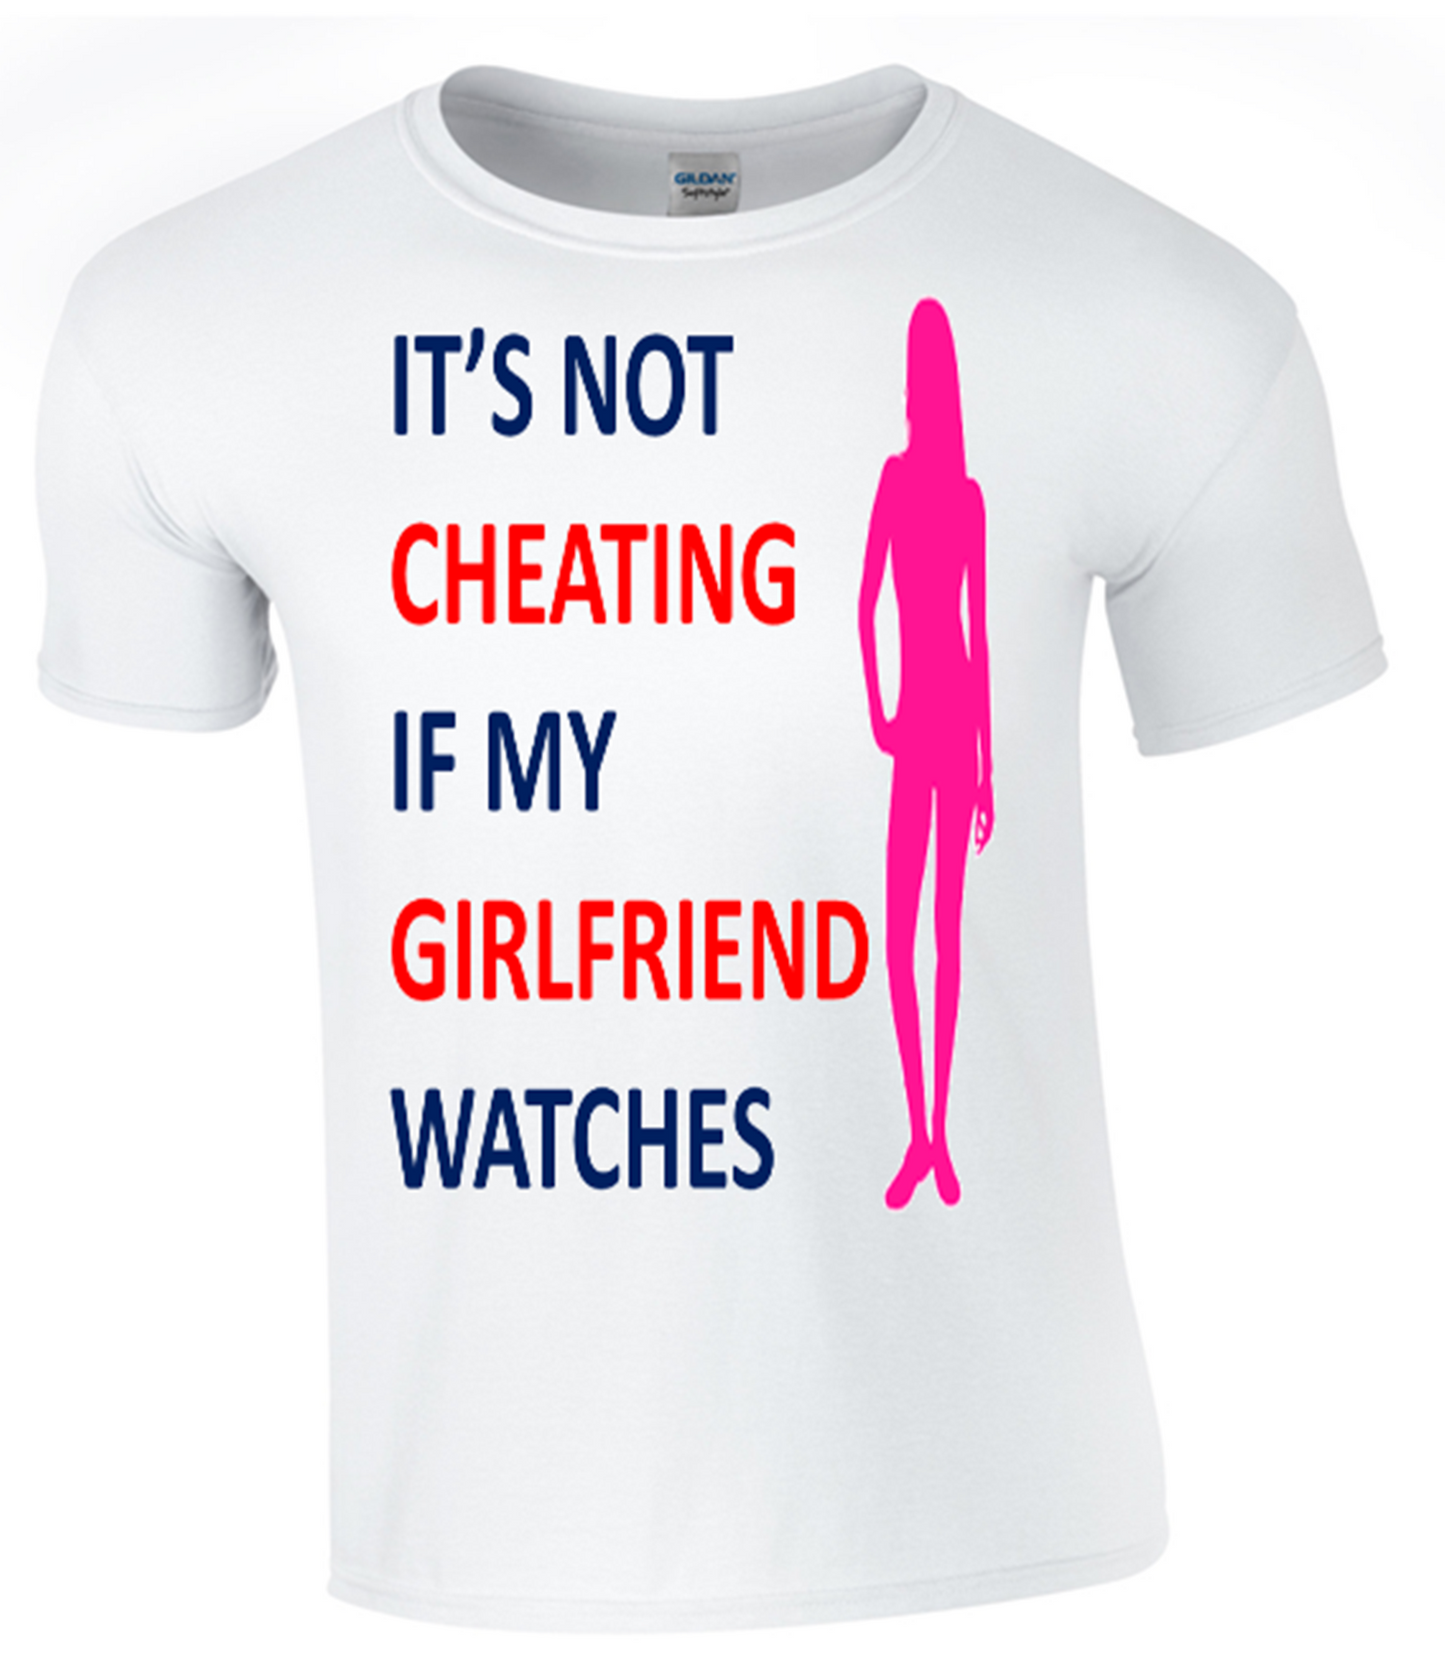 IT’S NOT CHEATING IF MY ??????? WATCHES - Army 1157 kit S / GIRLFRIEND Army 1157 Kit Veterans Owned Business